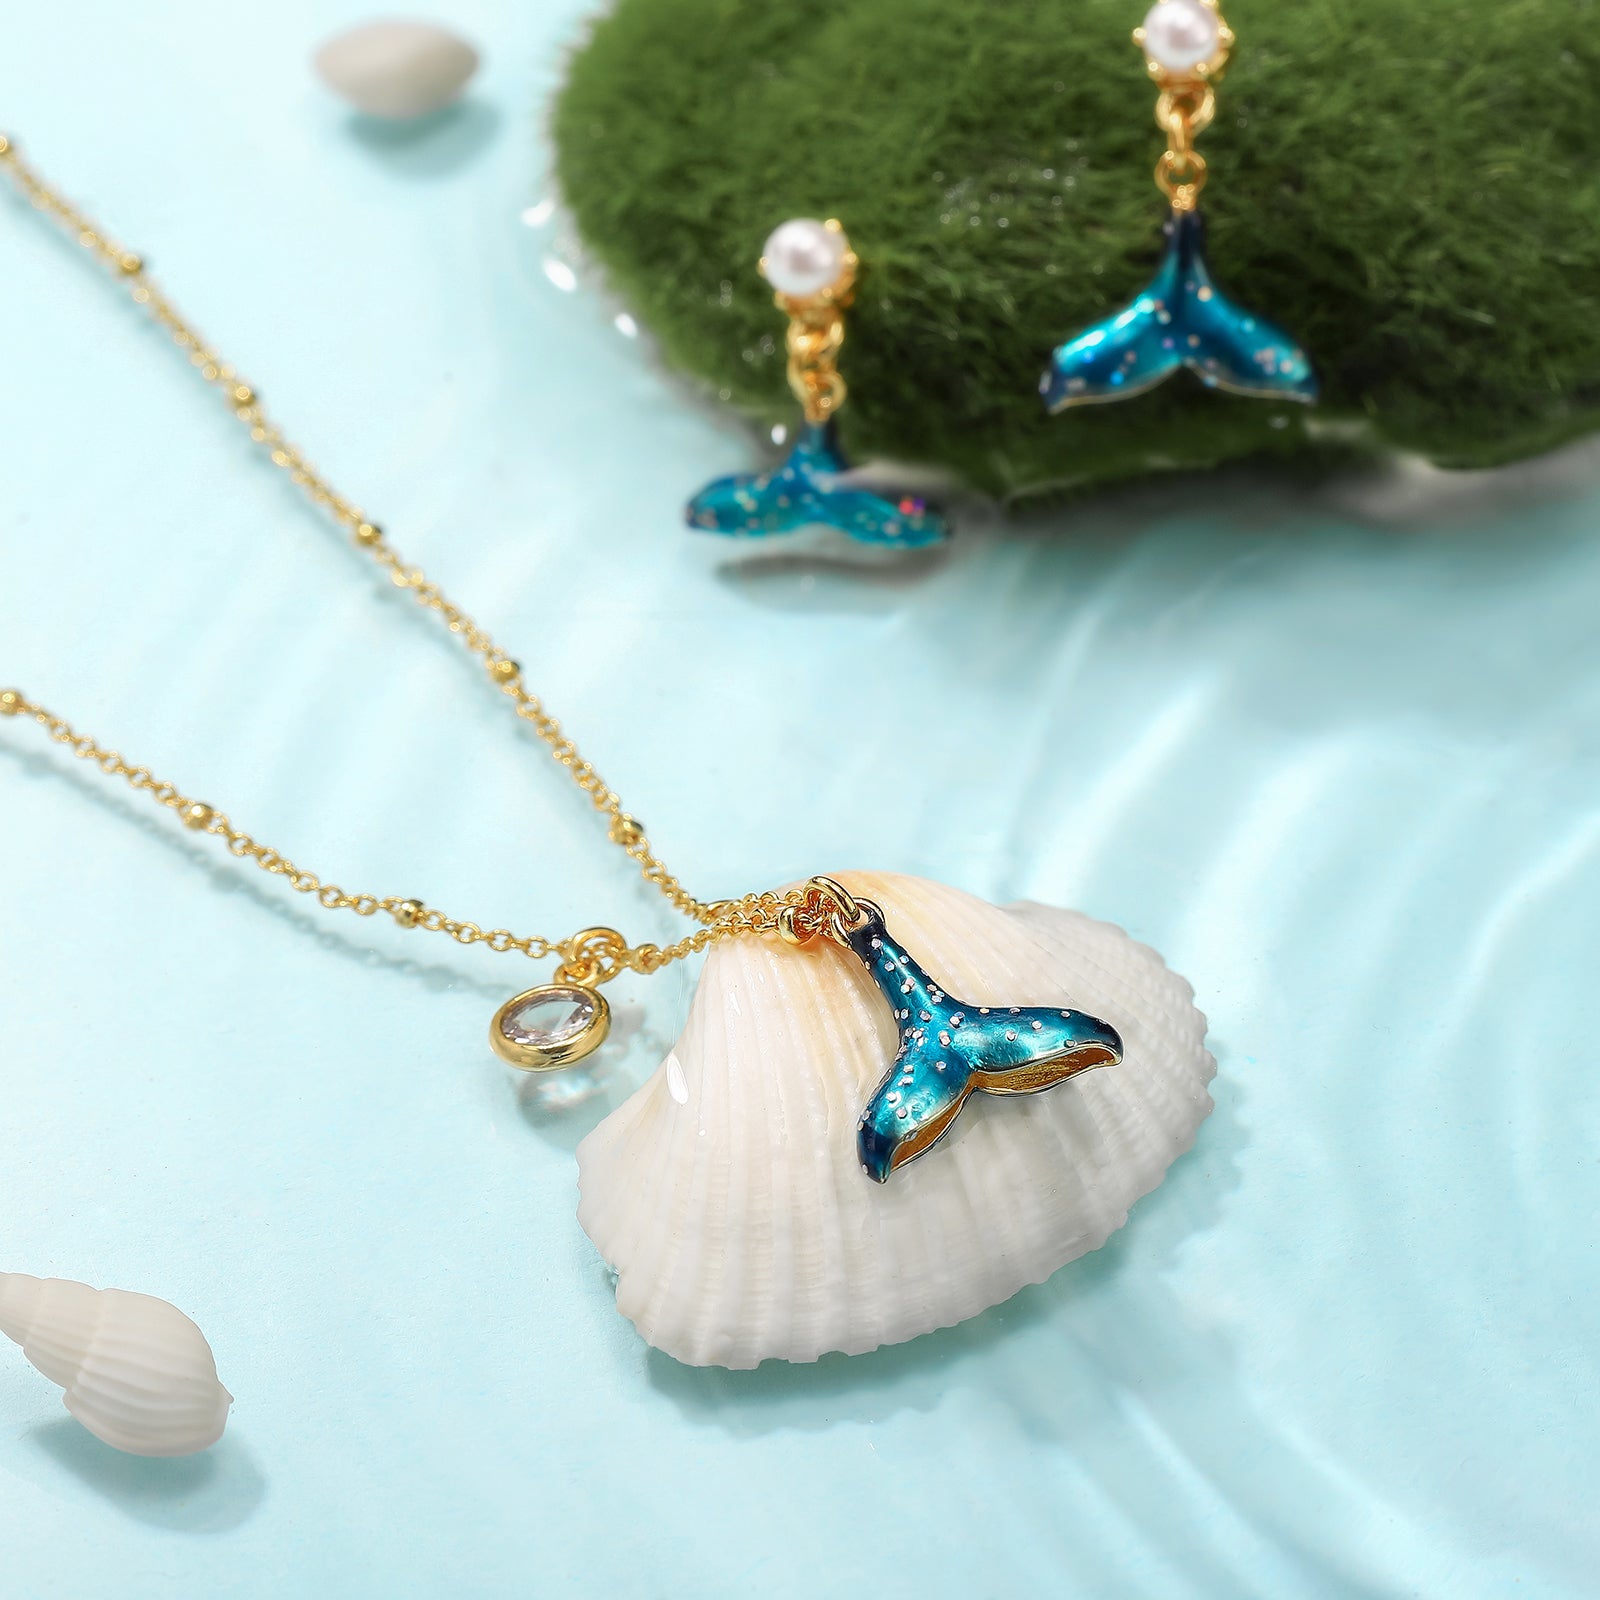 mermaid tail necklace and earrings